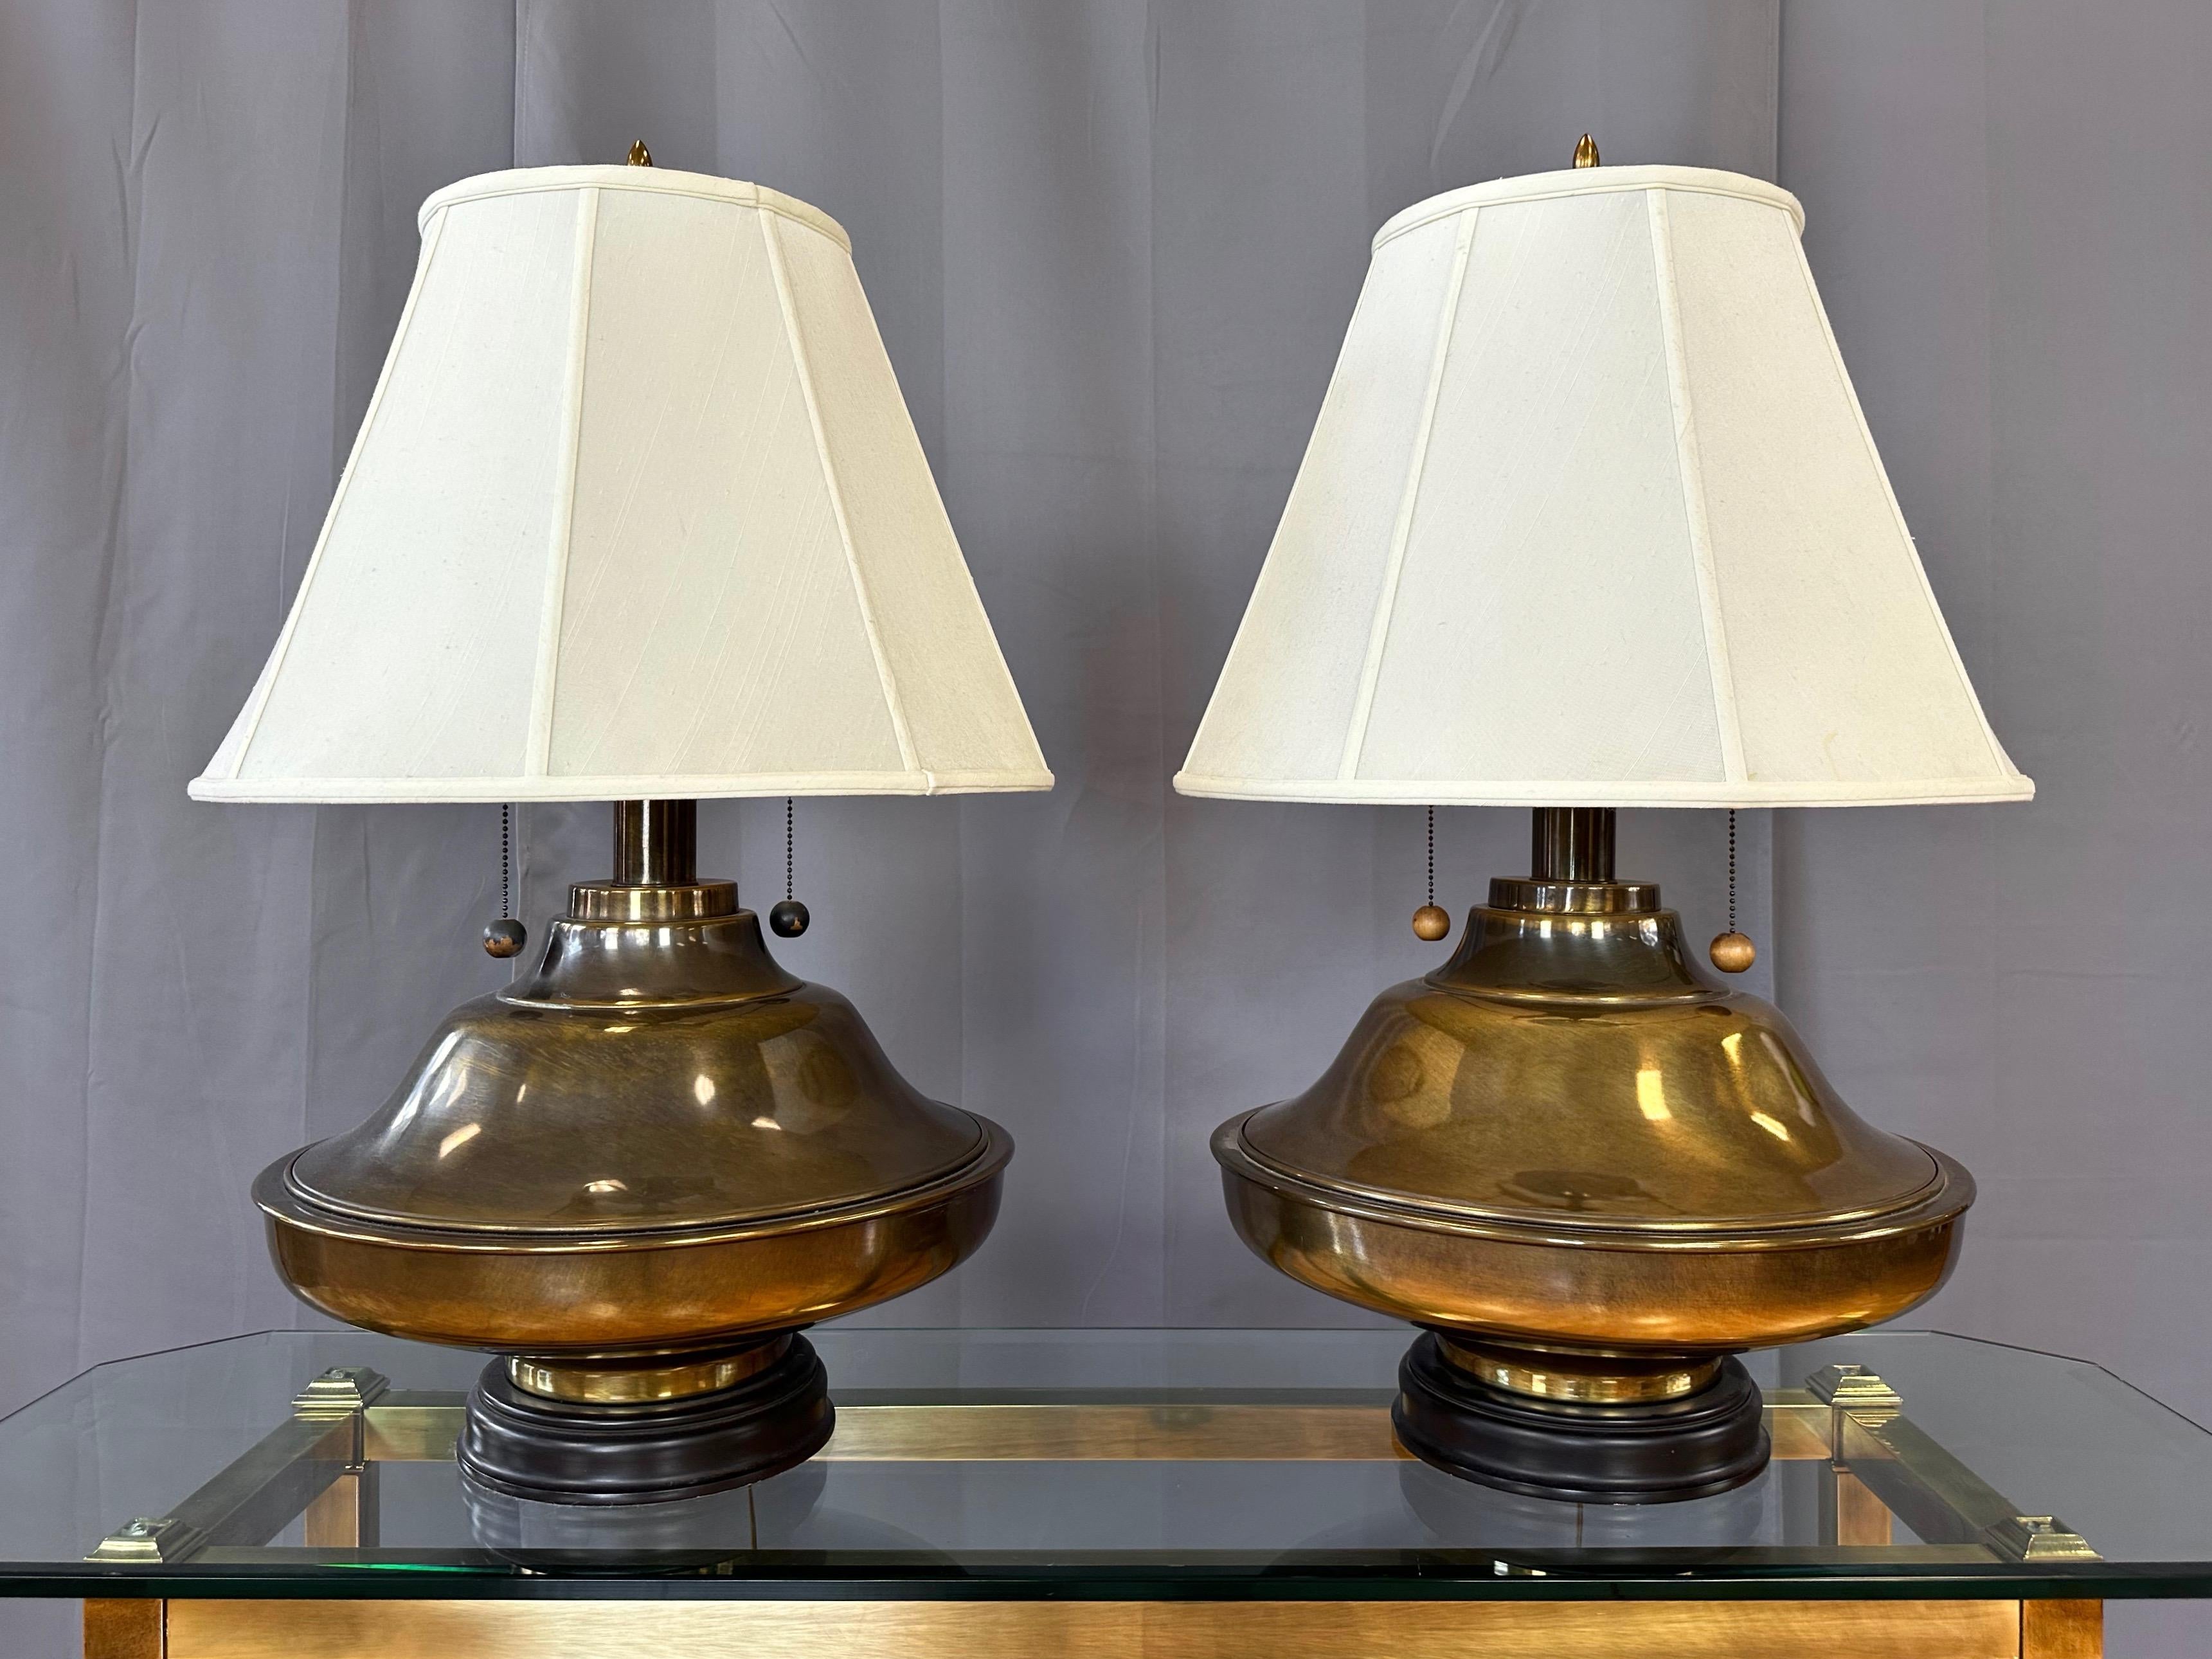 A pair of monumental 1960s Marbro-style Hollywood Regency antiqued brass table lamps with silk shades.

Very substantial and visual striking round brass bodies feature a quite uncommon form not seen in other lamps produced by the same manufacturer